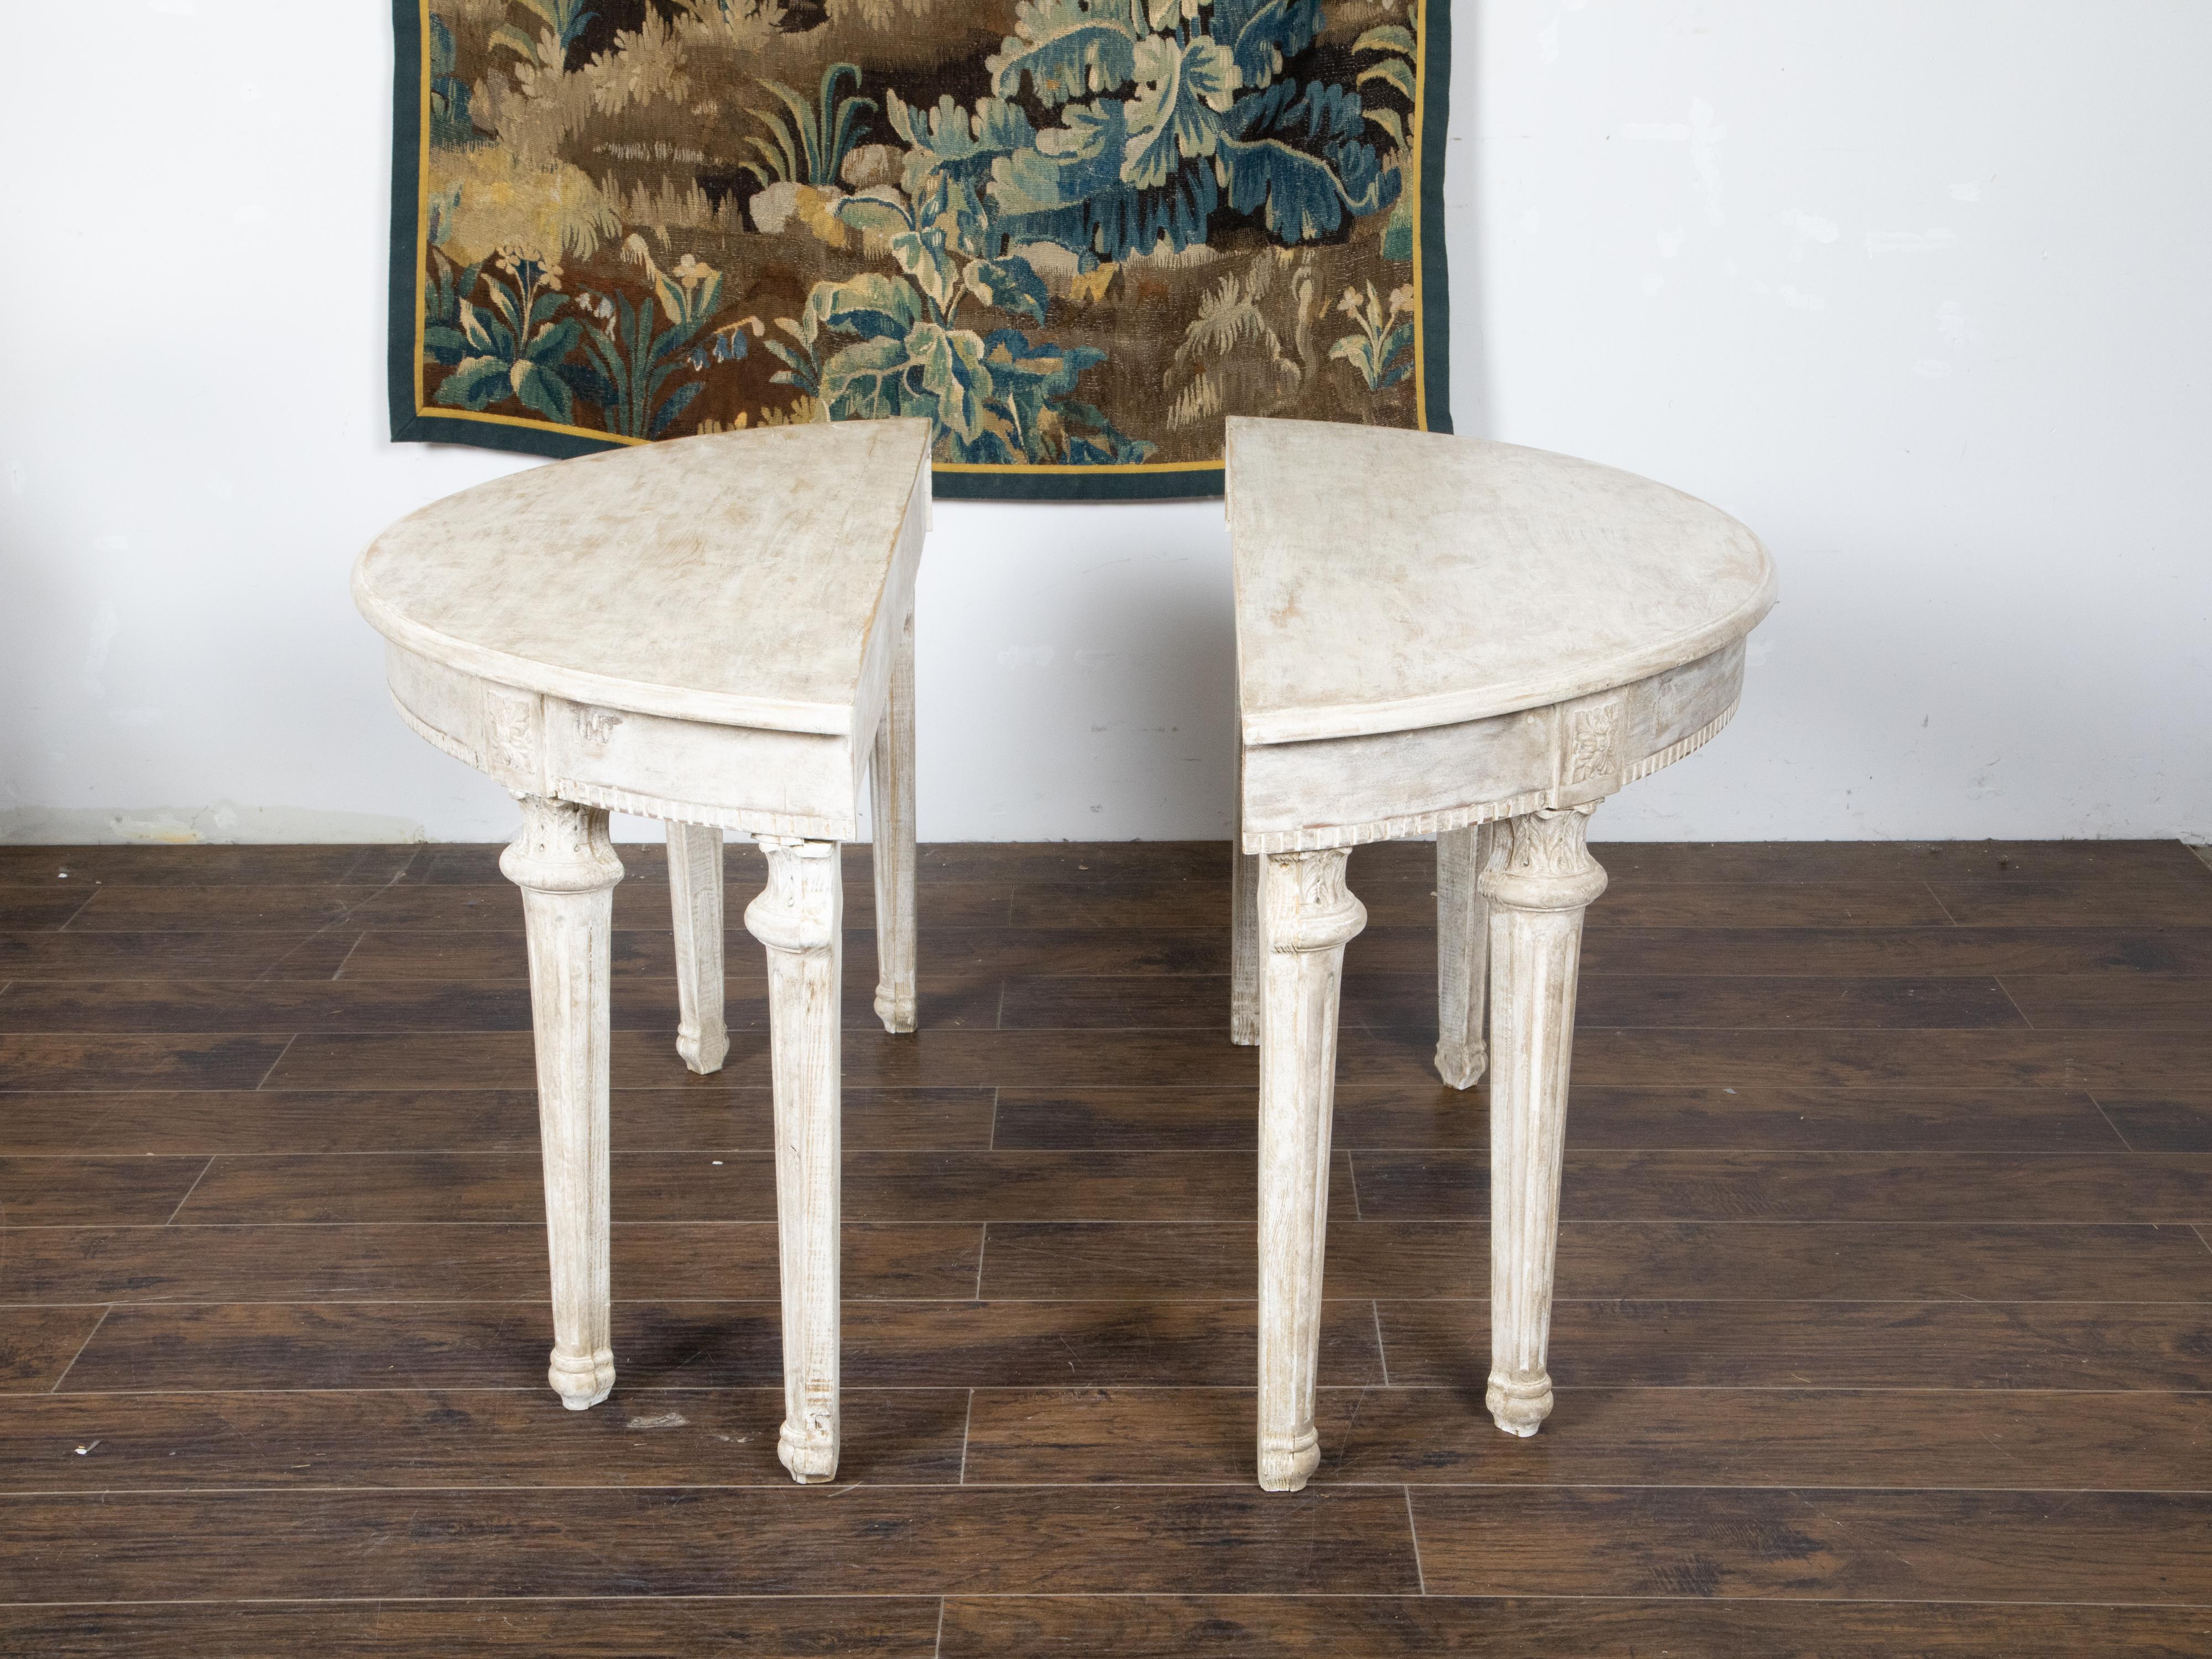 A pair of French Neoclassical style painted wood demilune console tables from the late 19th century, with carved rosettes, fluted legs and acanthus leaves. Created in France during the last quarter of the 19th century, each of this pair of demilunes